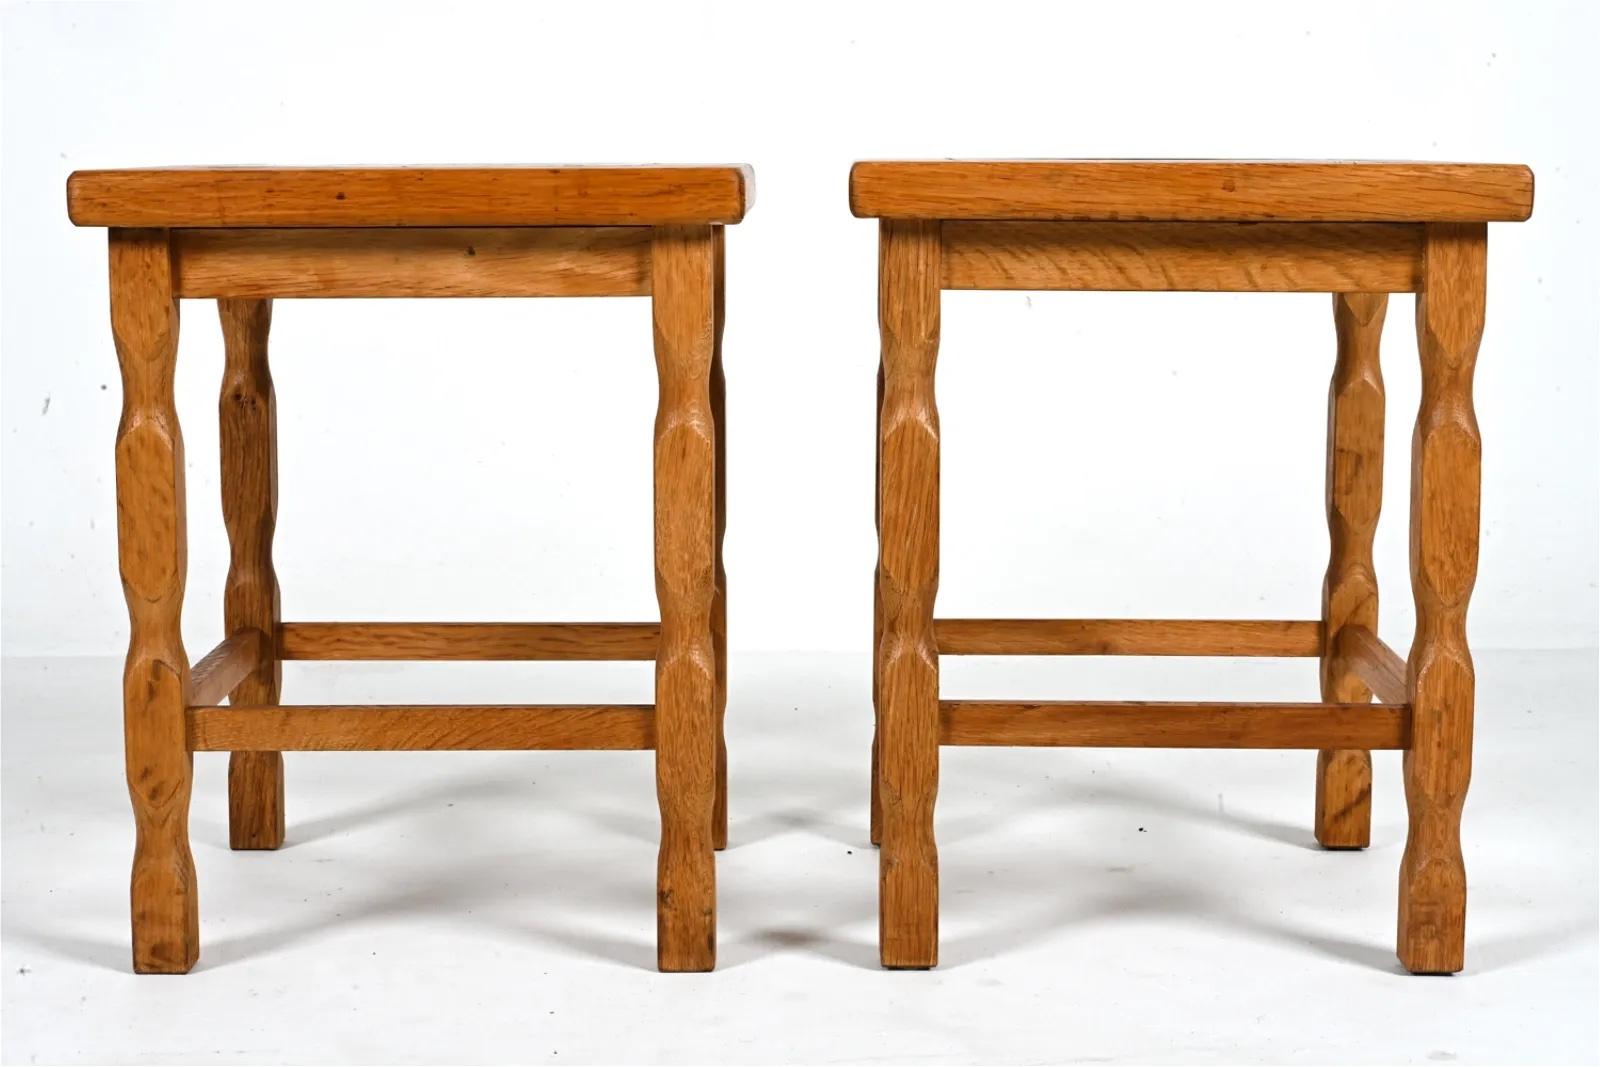 Pair of plant stands or end tables in solid oak, each inset with a beautiful ceramic tile. Wear due to age and use, visible water marks. 